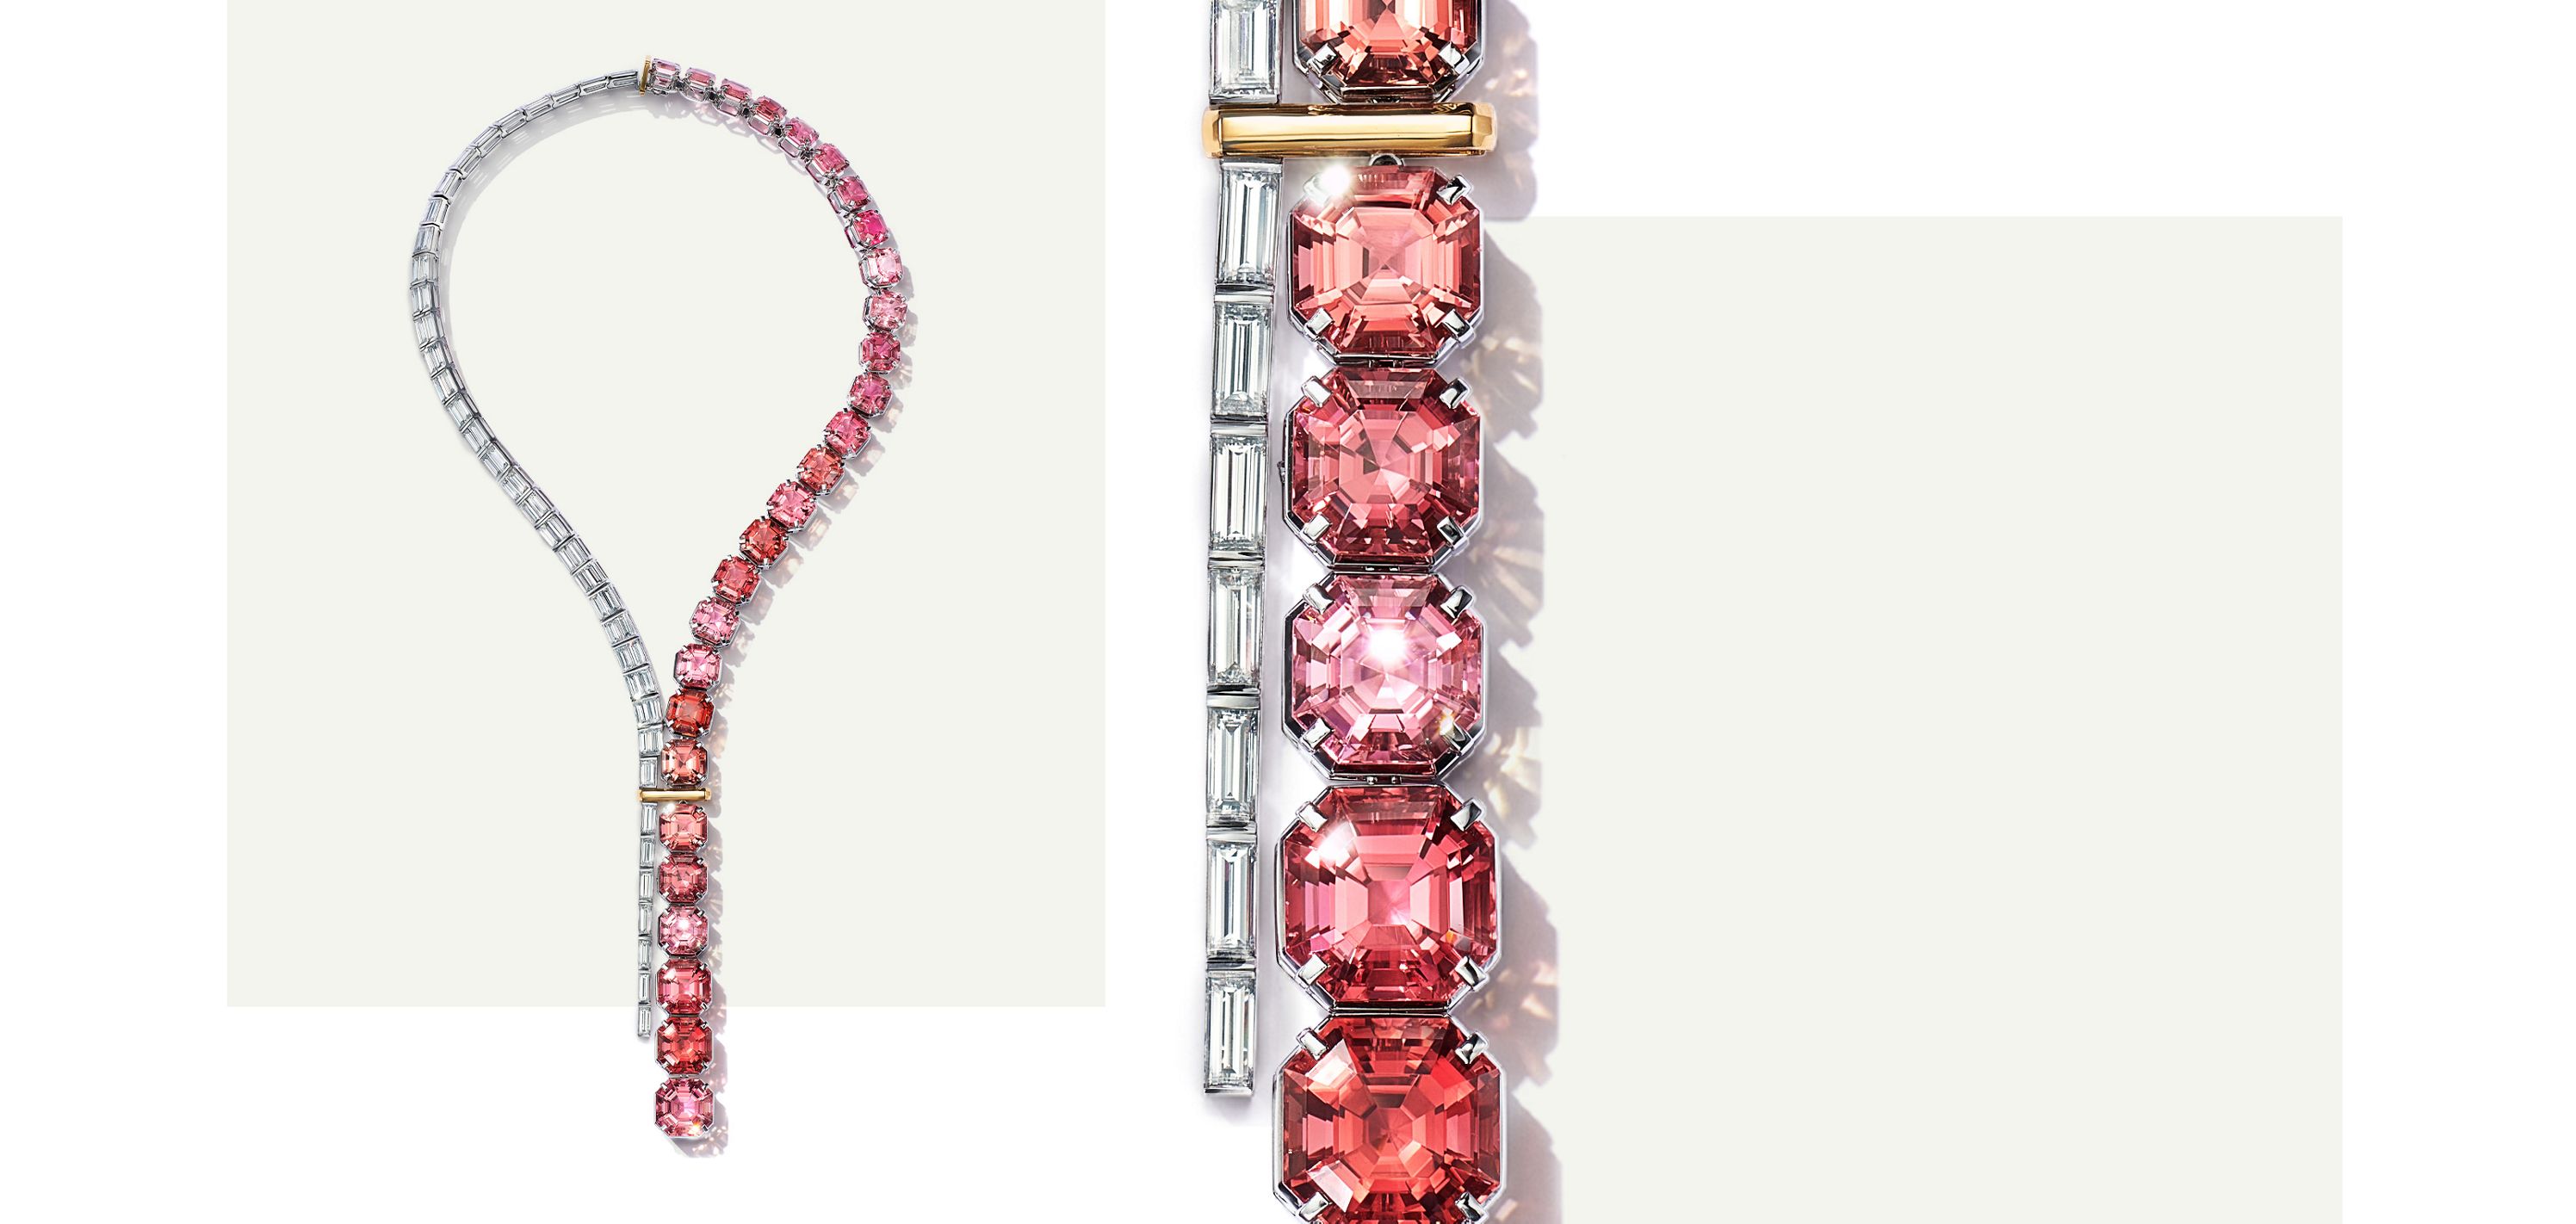 A DIAMOND AND PINK TOURMALINE NECKLACE, BY TIFFANY & CO.